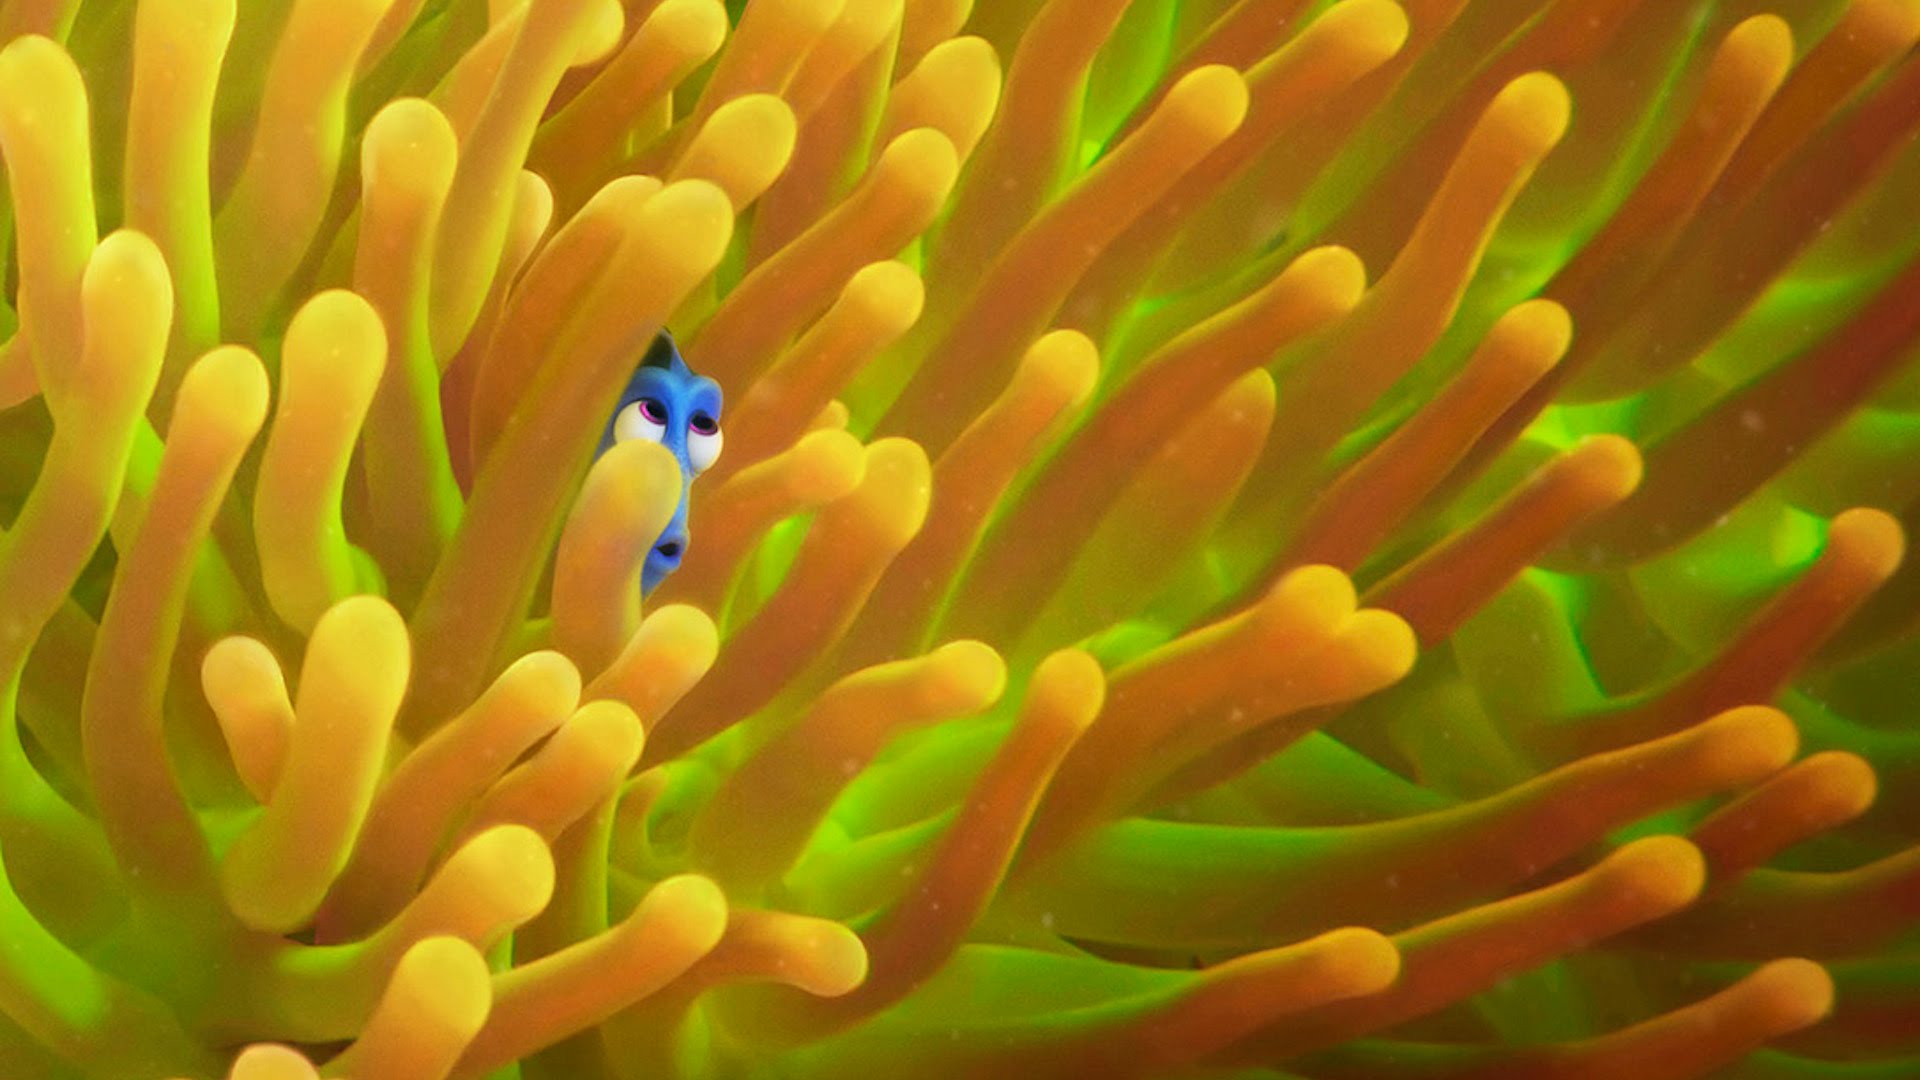 Finding Dory Wallpaper Movie HD